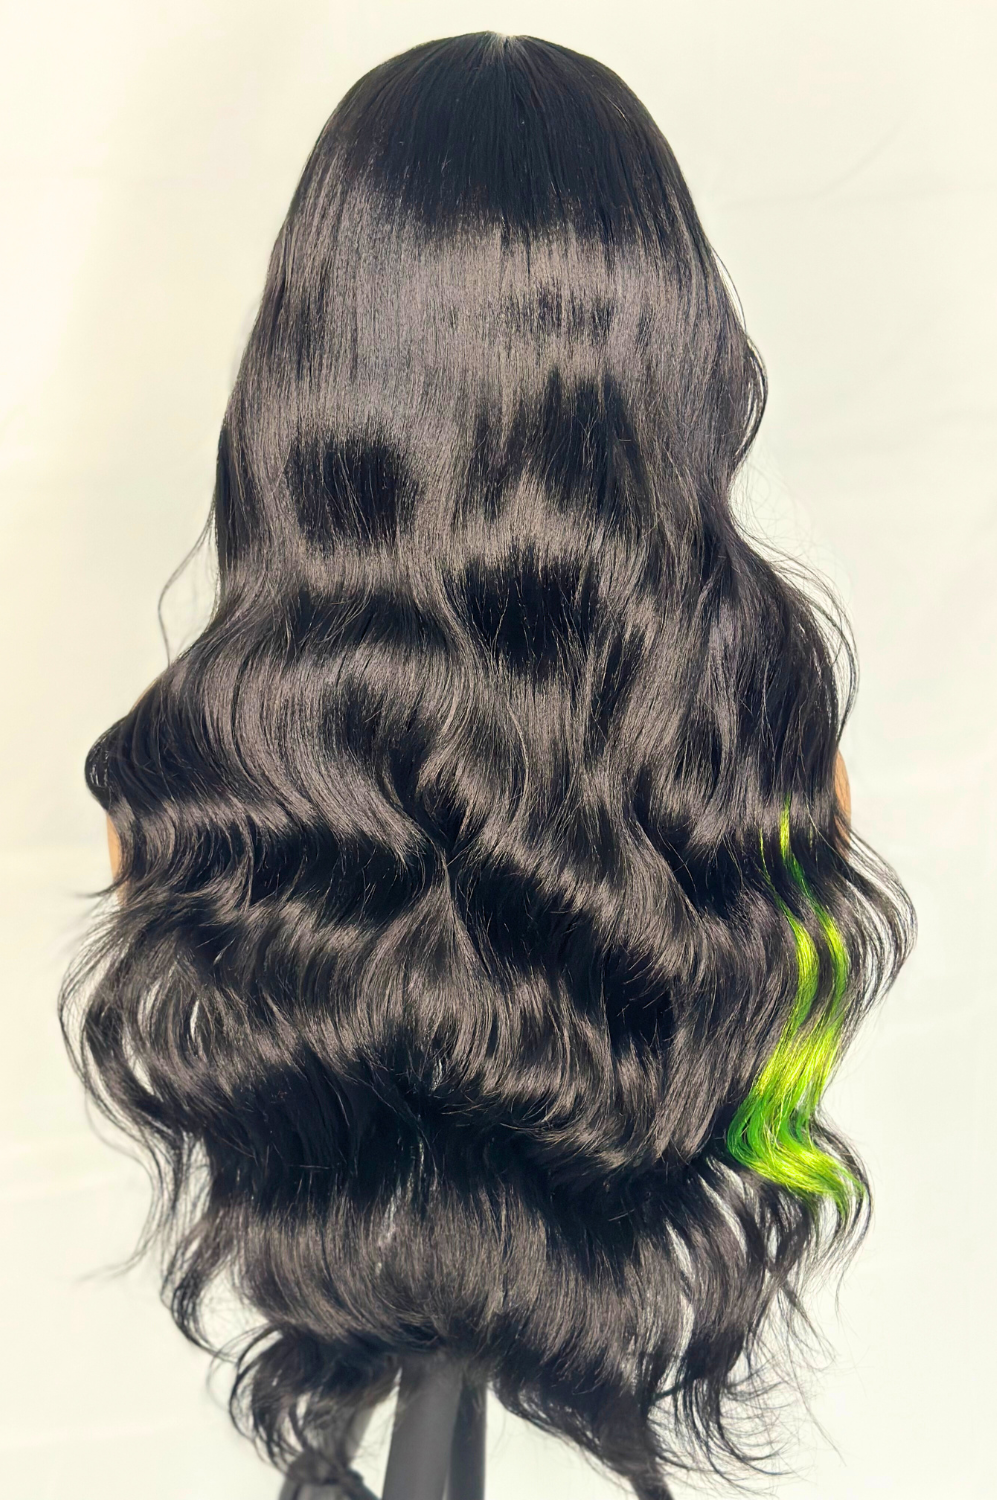 "Mystic Ivy" | HD Synthetic Lace Front Wig | Long Wavy Black/Green Skunk Stripe Wig